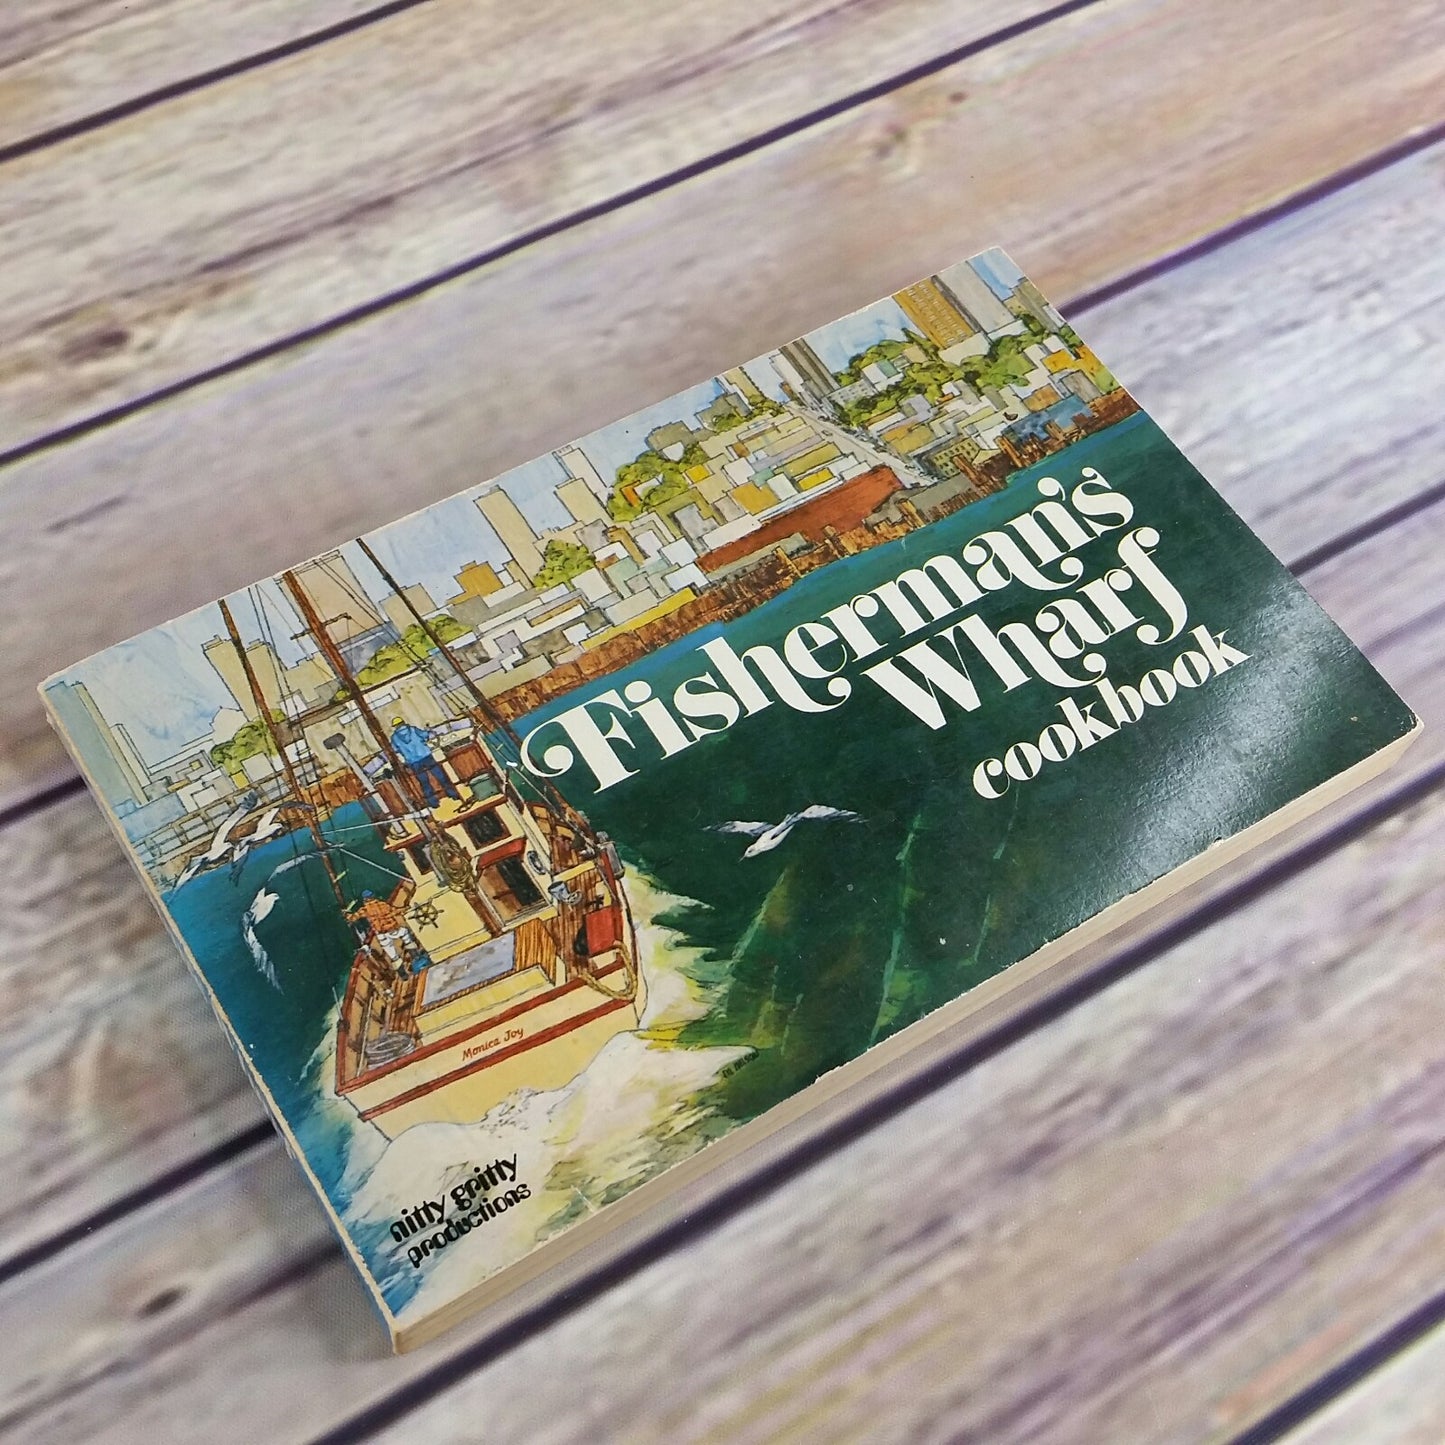 Vintage Fishermans Wharf Cookbook Seafood Recipes 1971 Barbara Lawrence Nitty Gritty Productions Paperback - At Grandma's Table